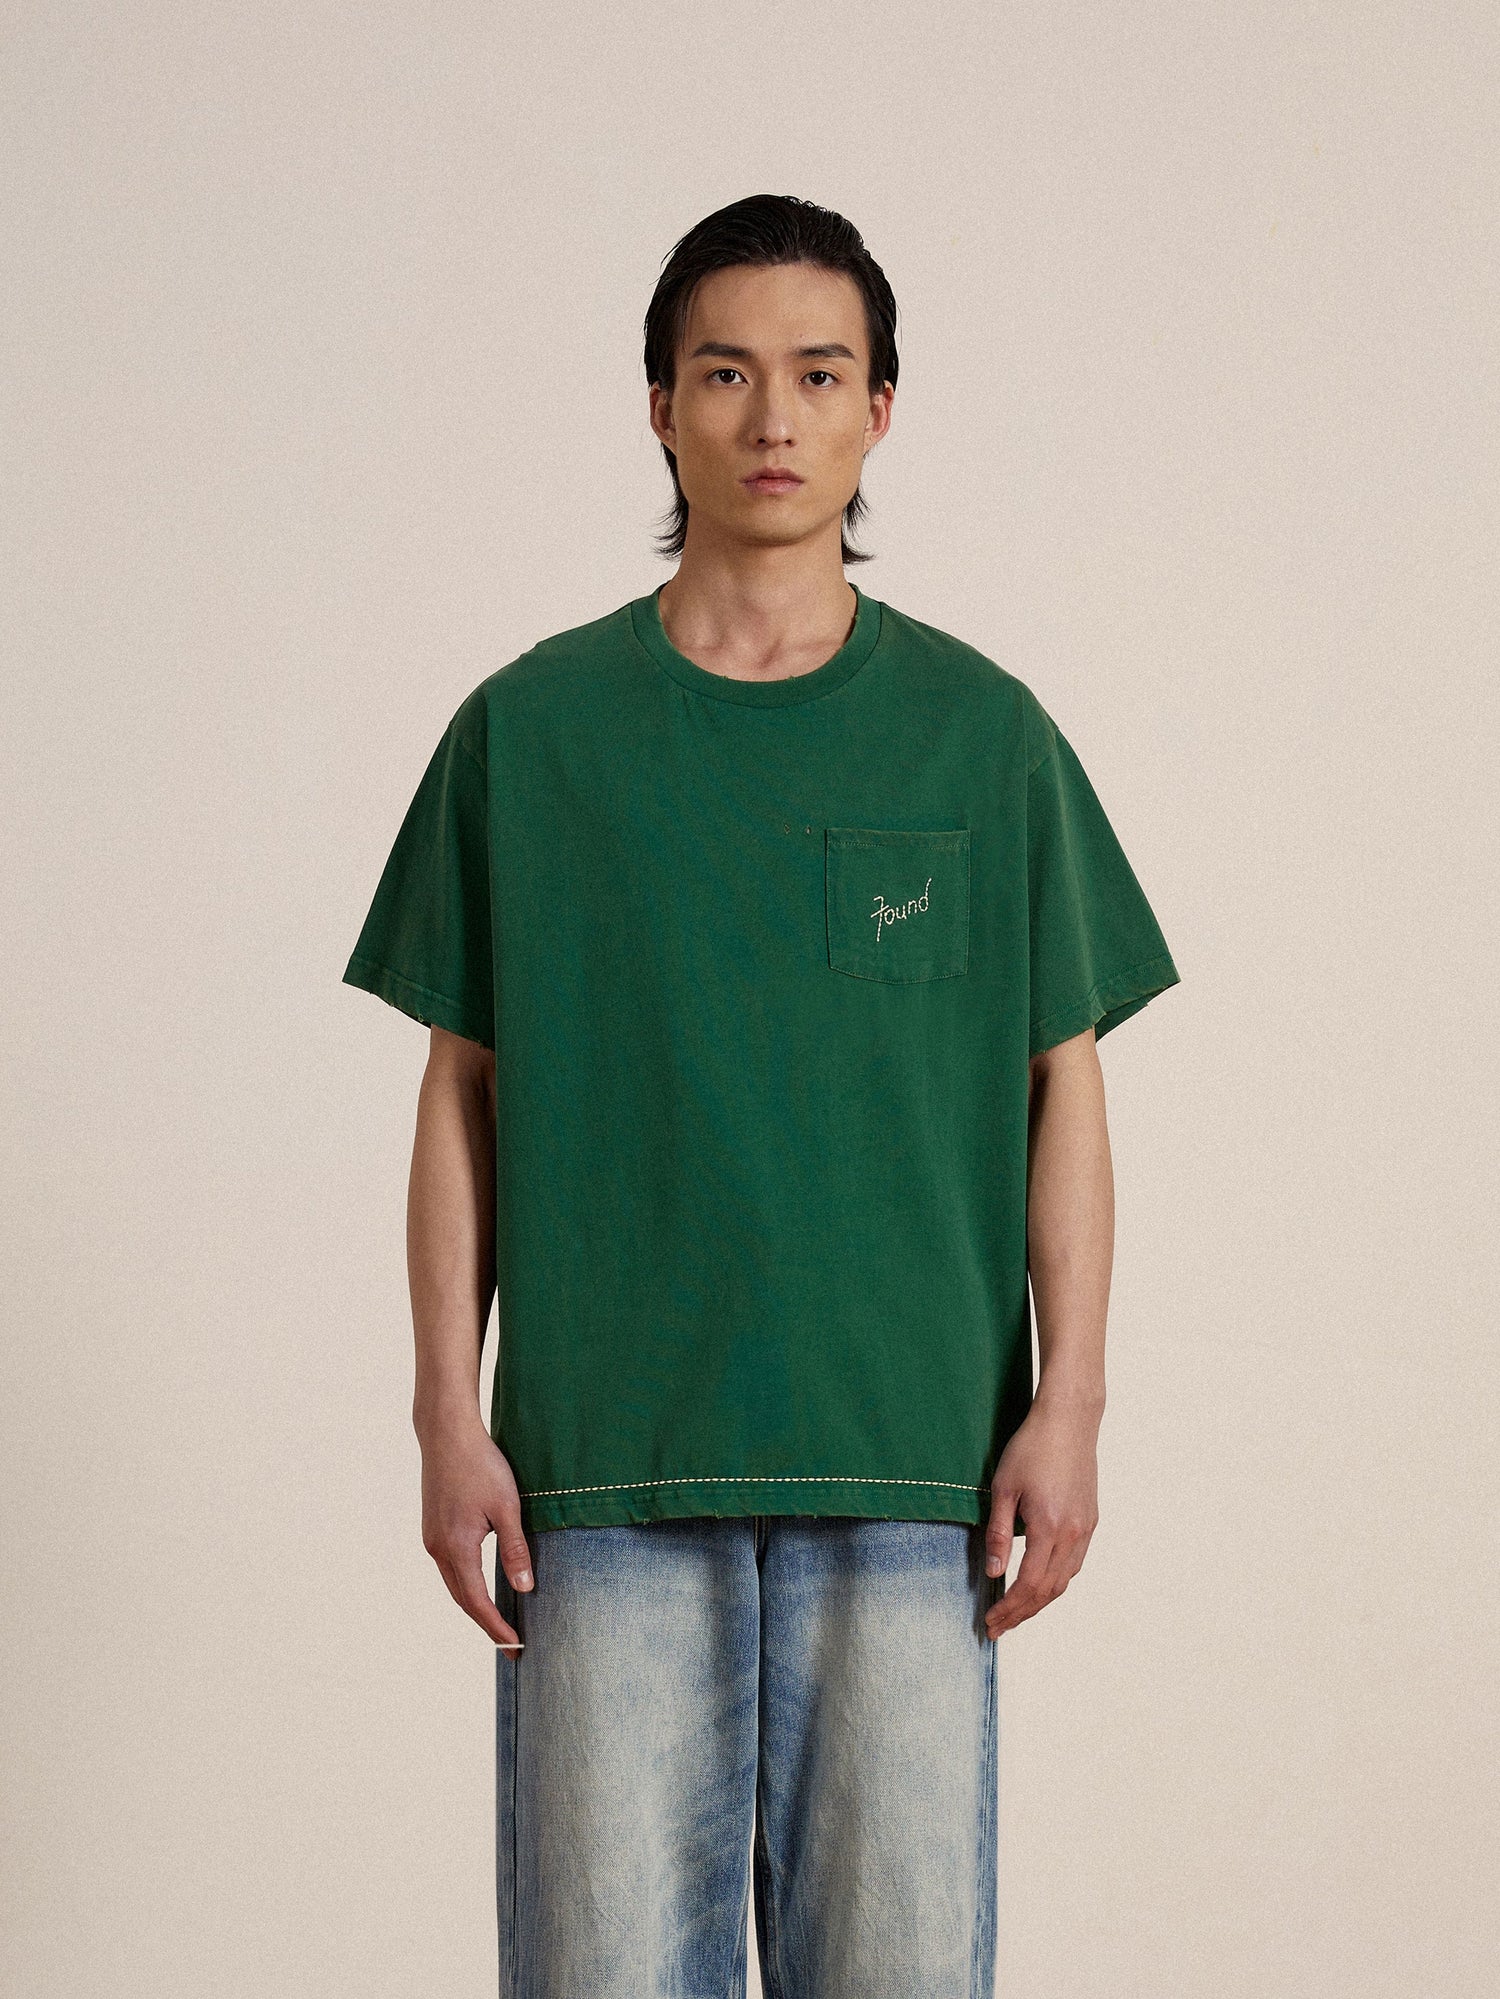 A man wearing a green Found embroidered logo tee and jeans with distressing.